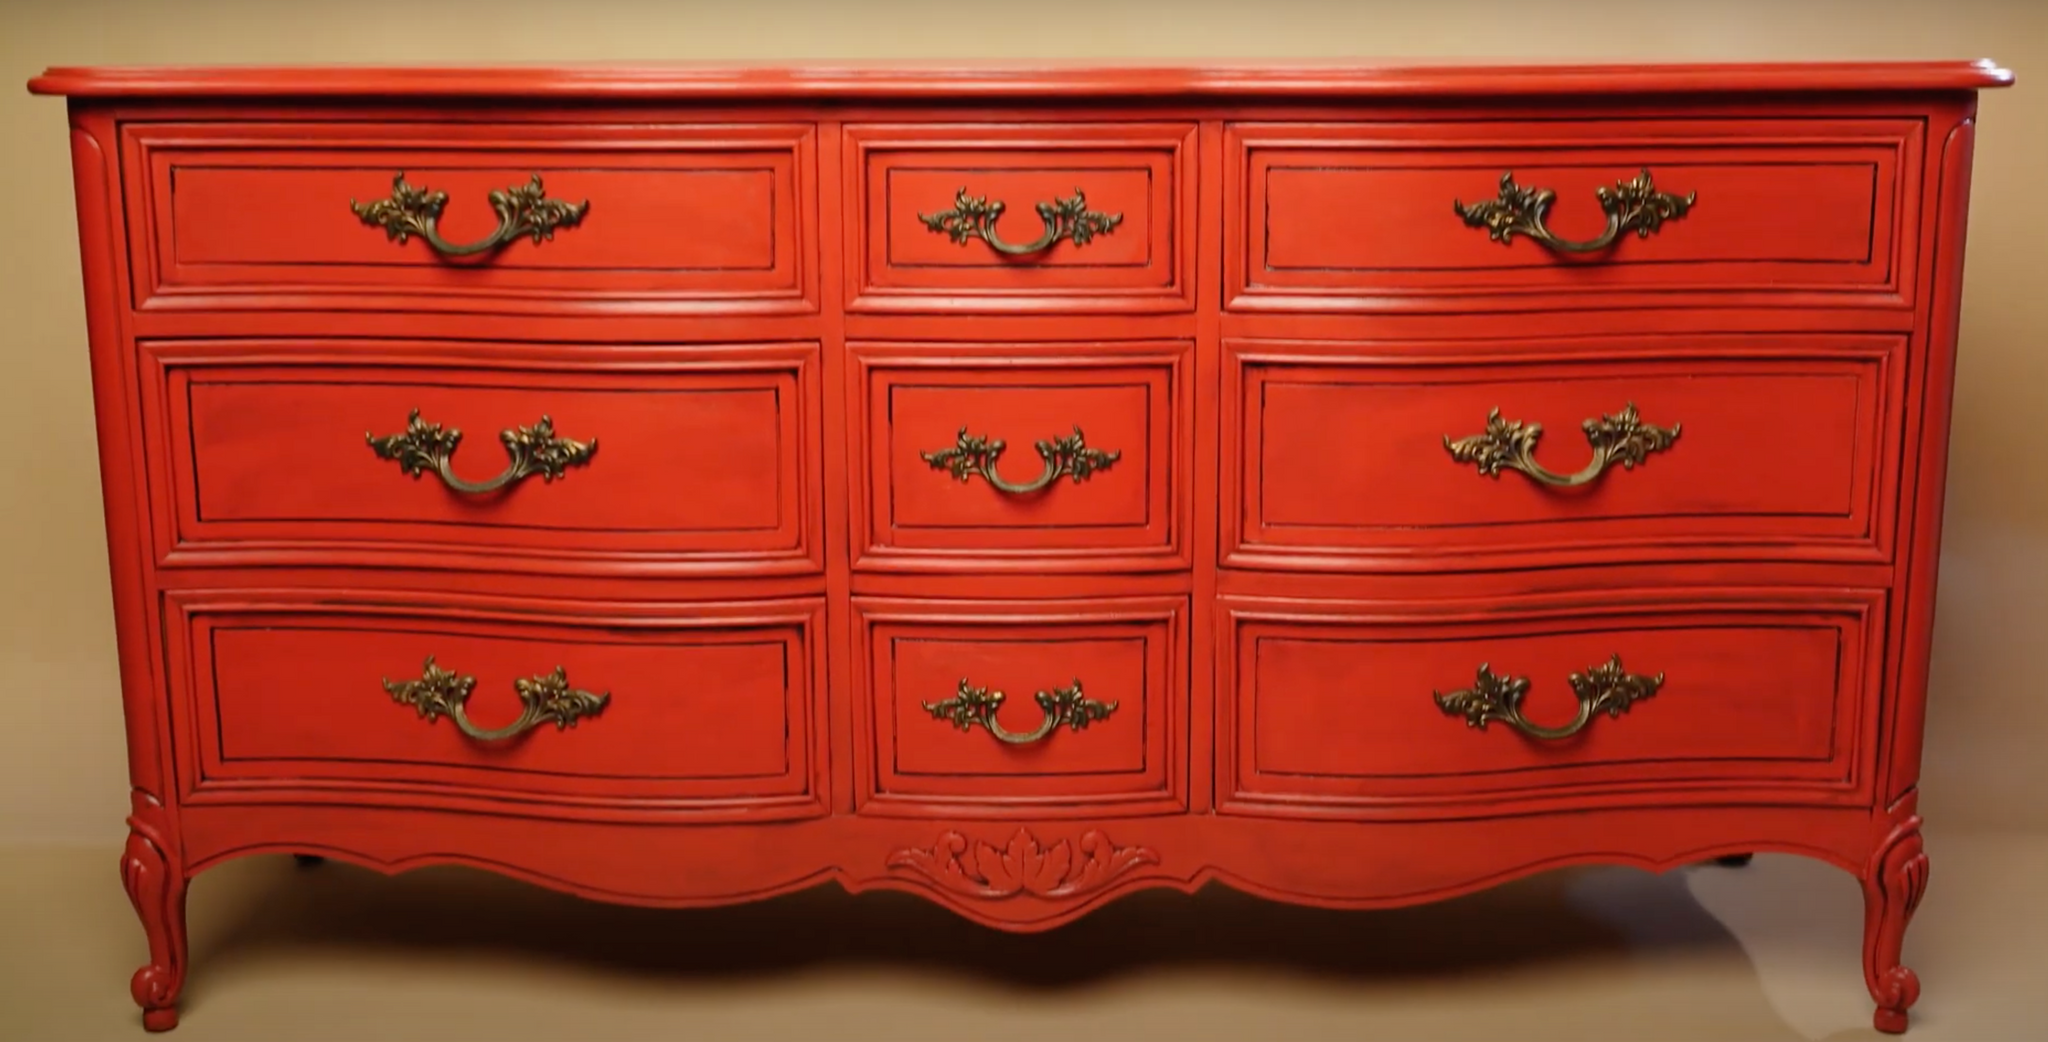 Antiquing Furniture Painted With Beyond Paint